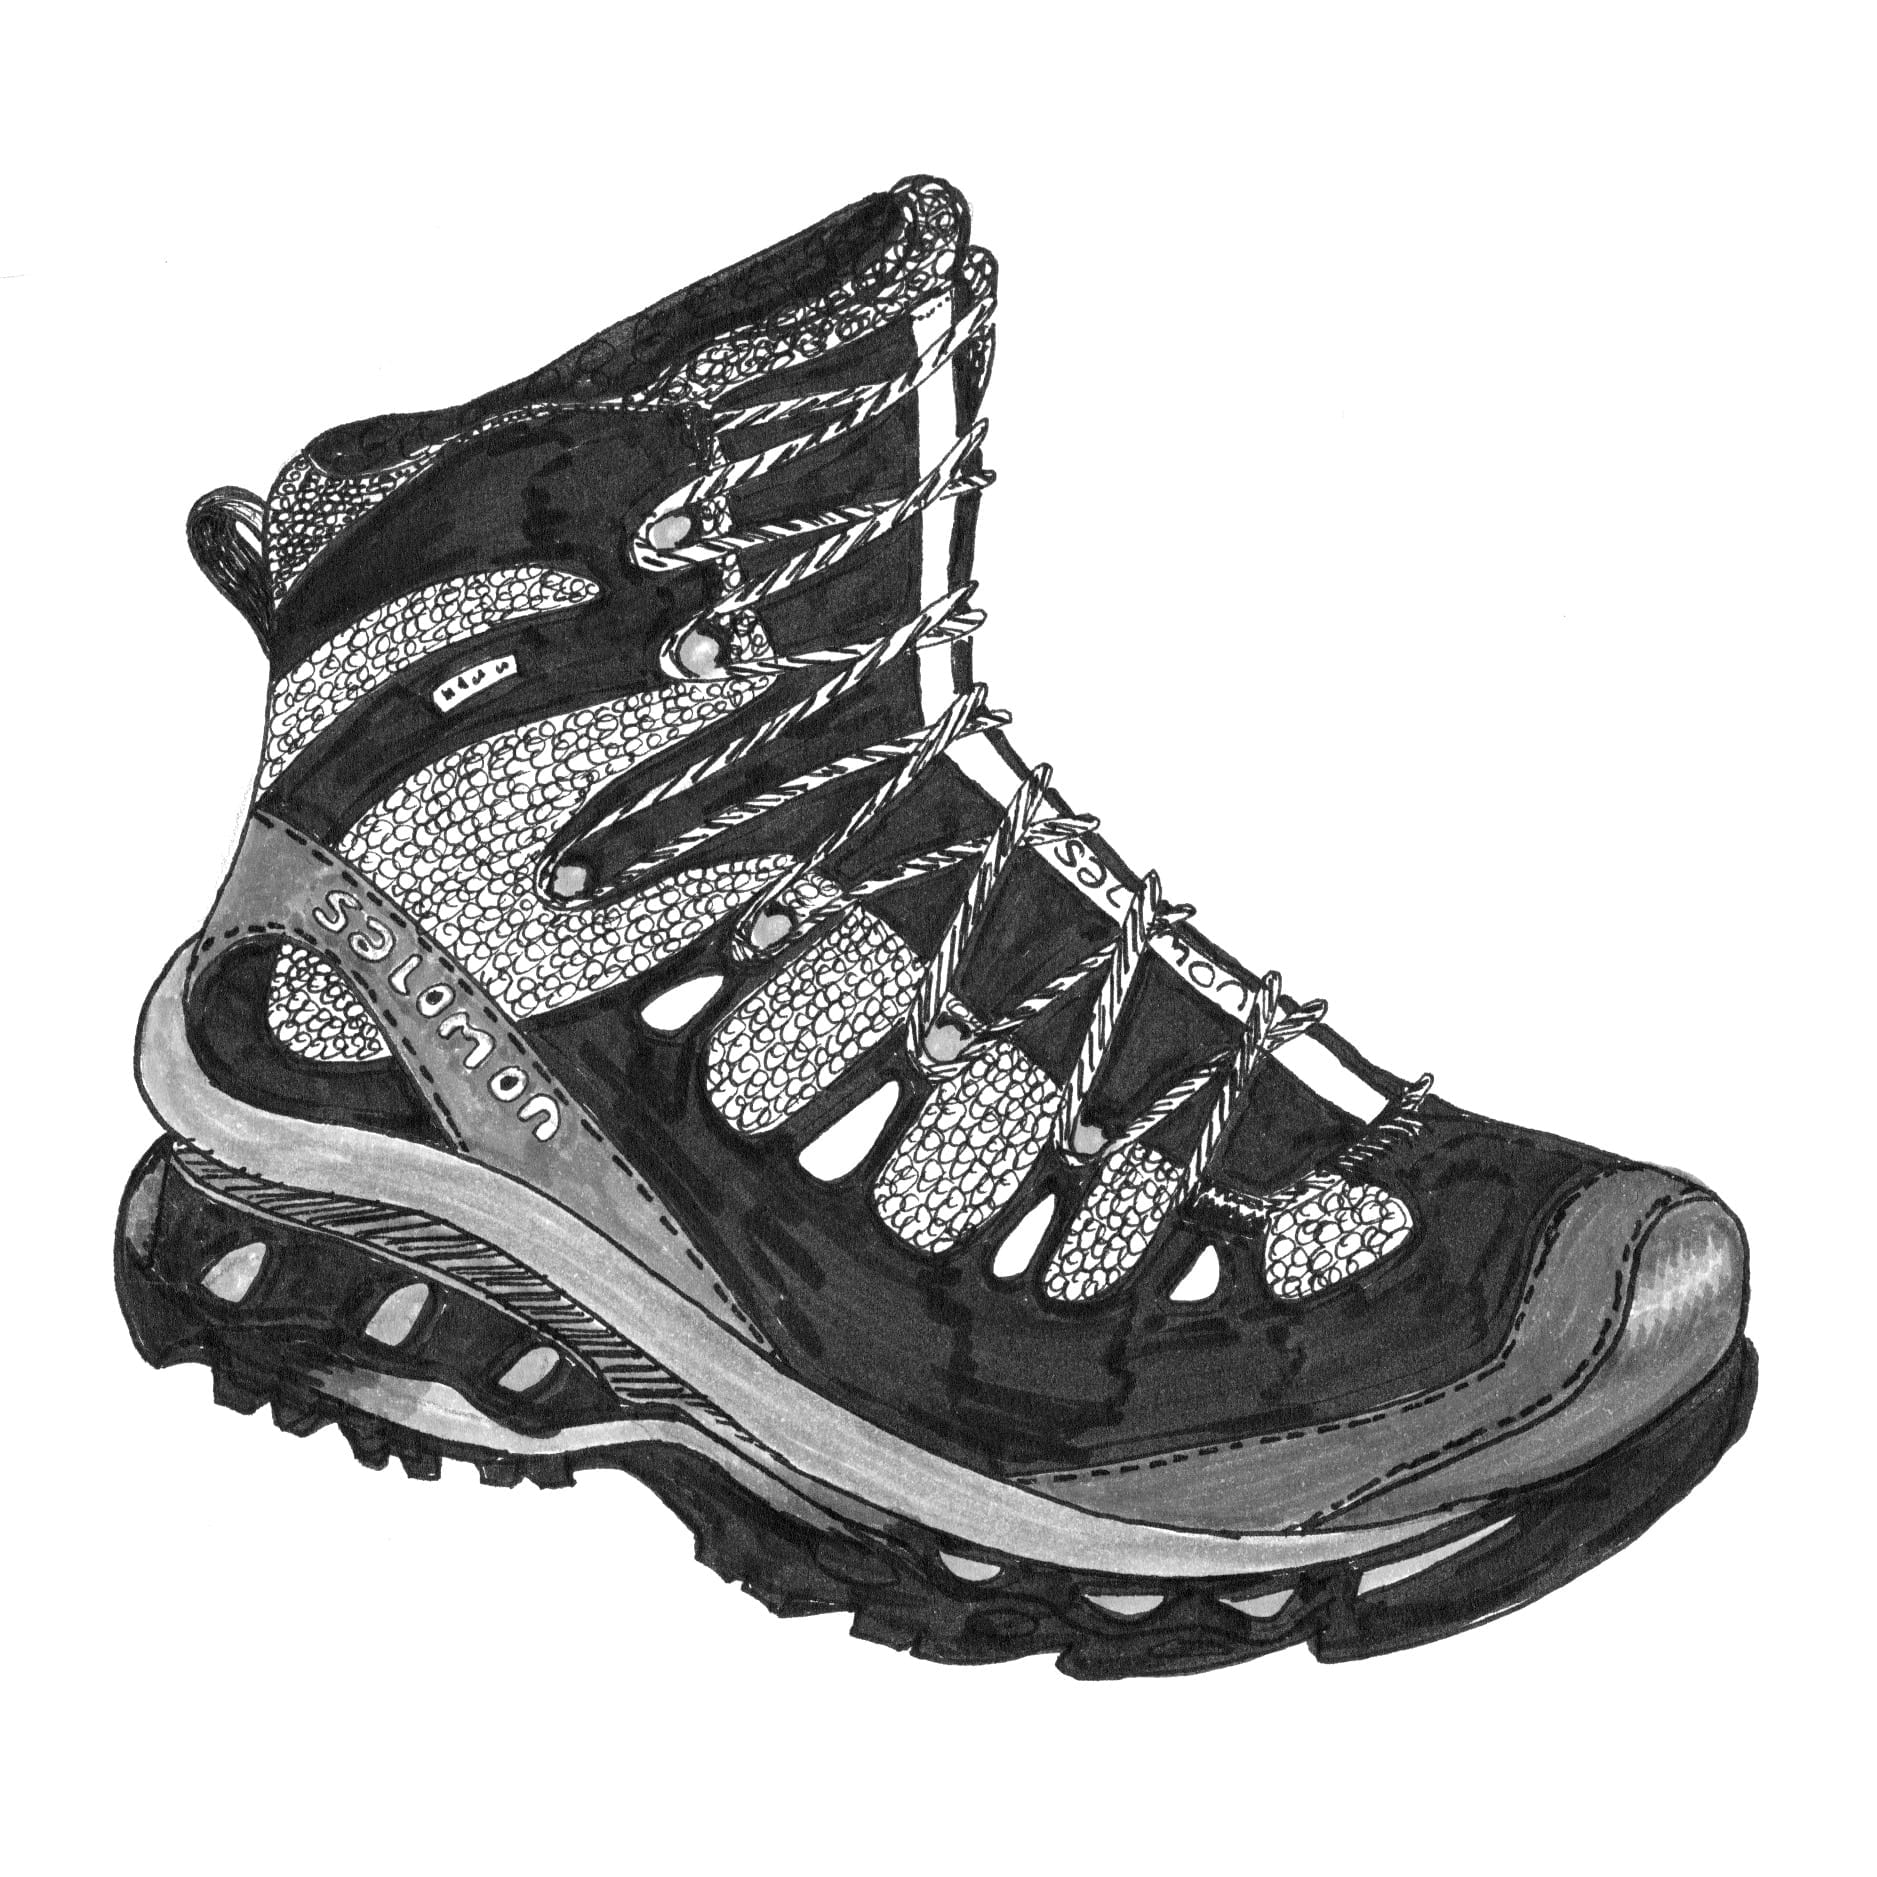 Ink drawing of hiking boot